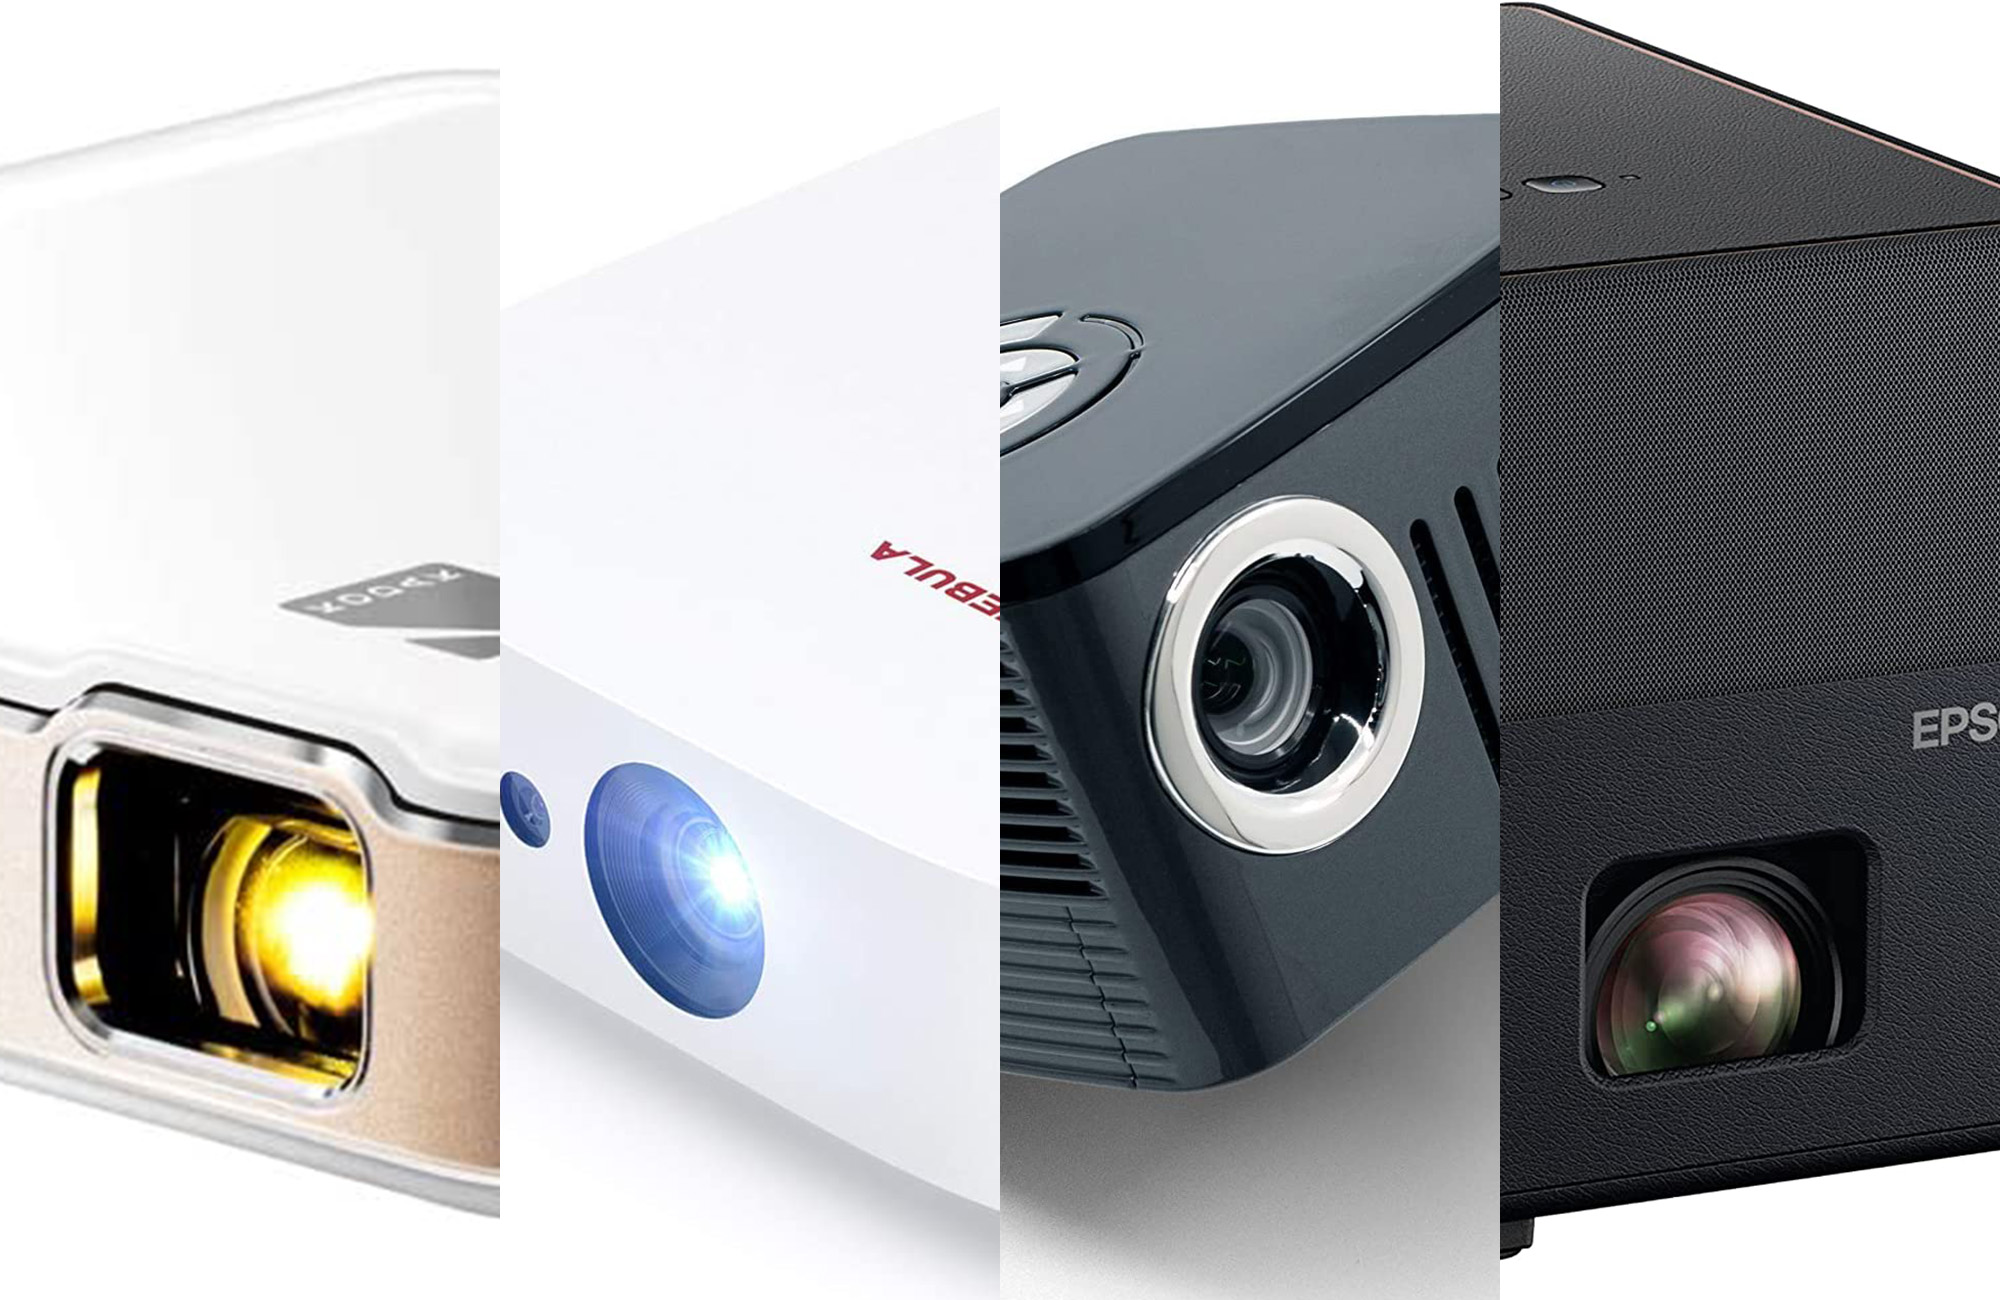 Mini Projector, Portable Projector for iPhone, Video Smart Led